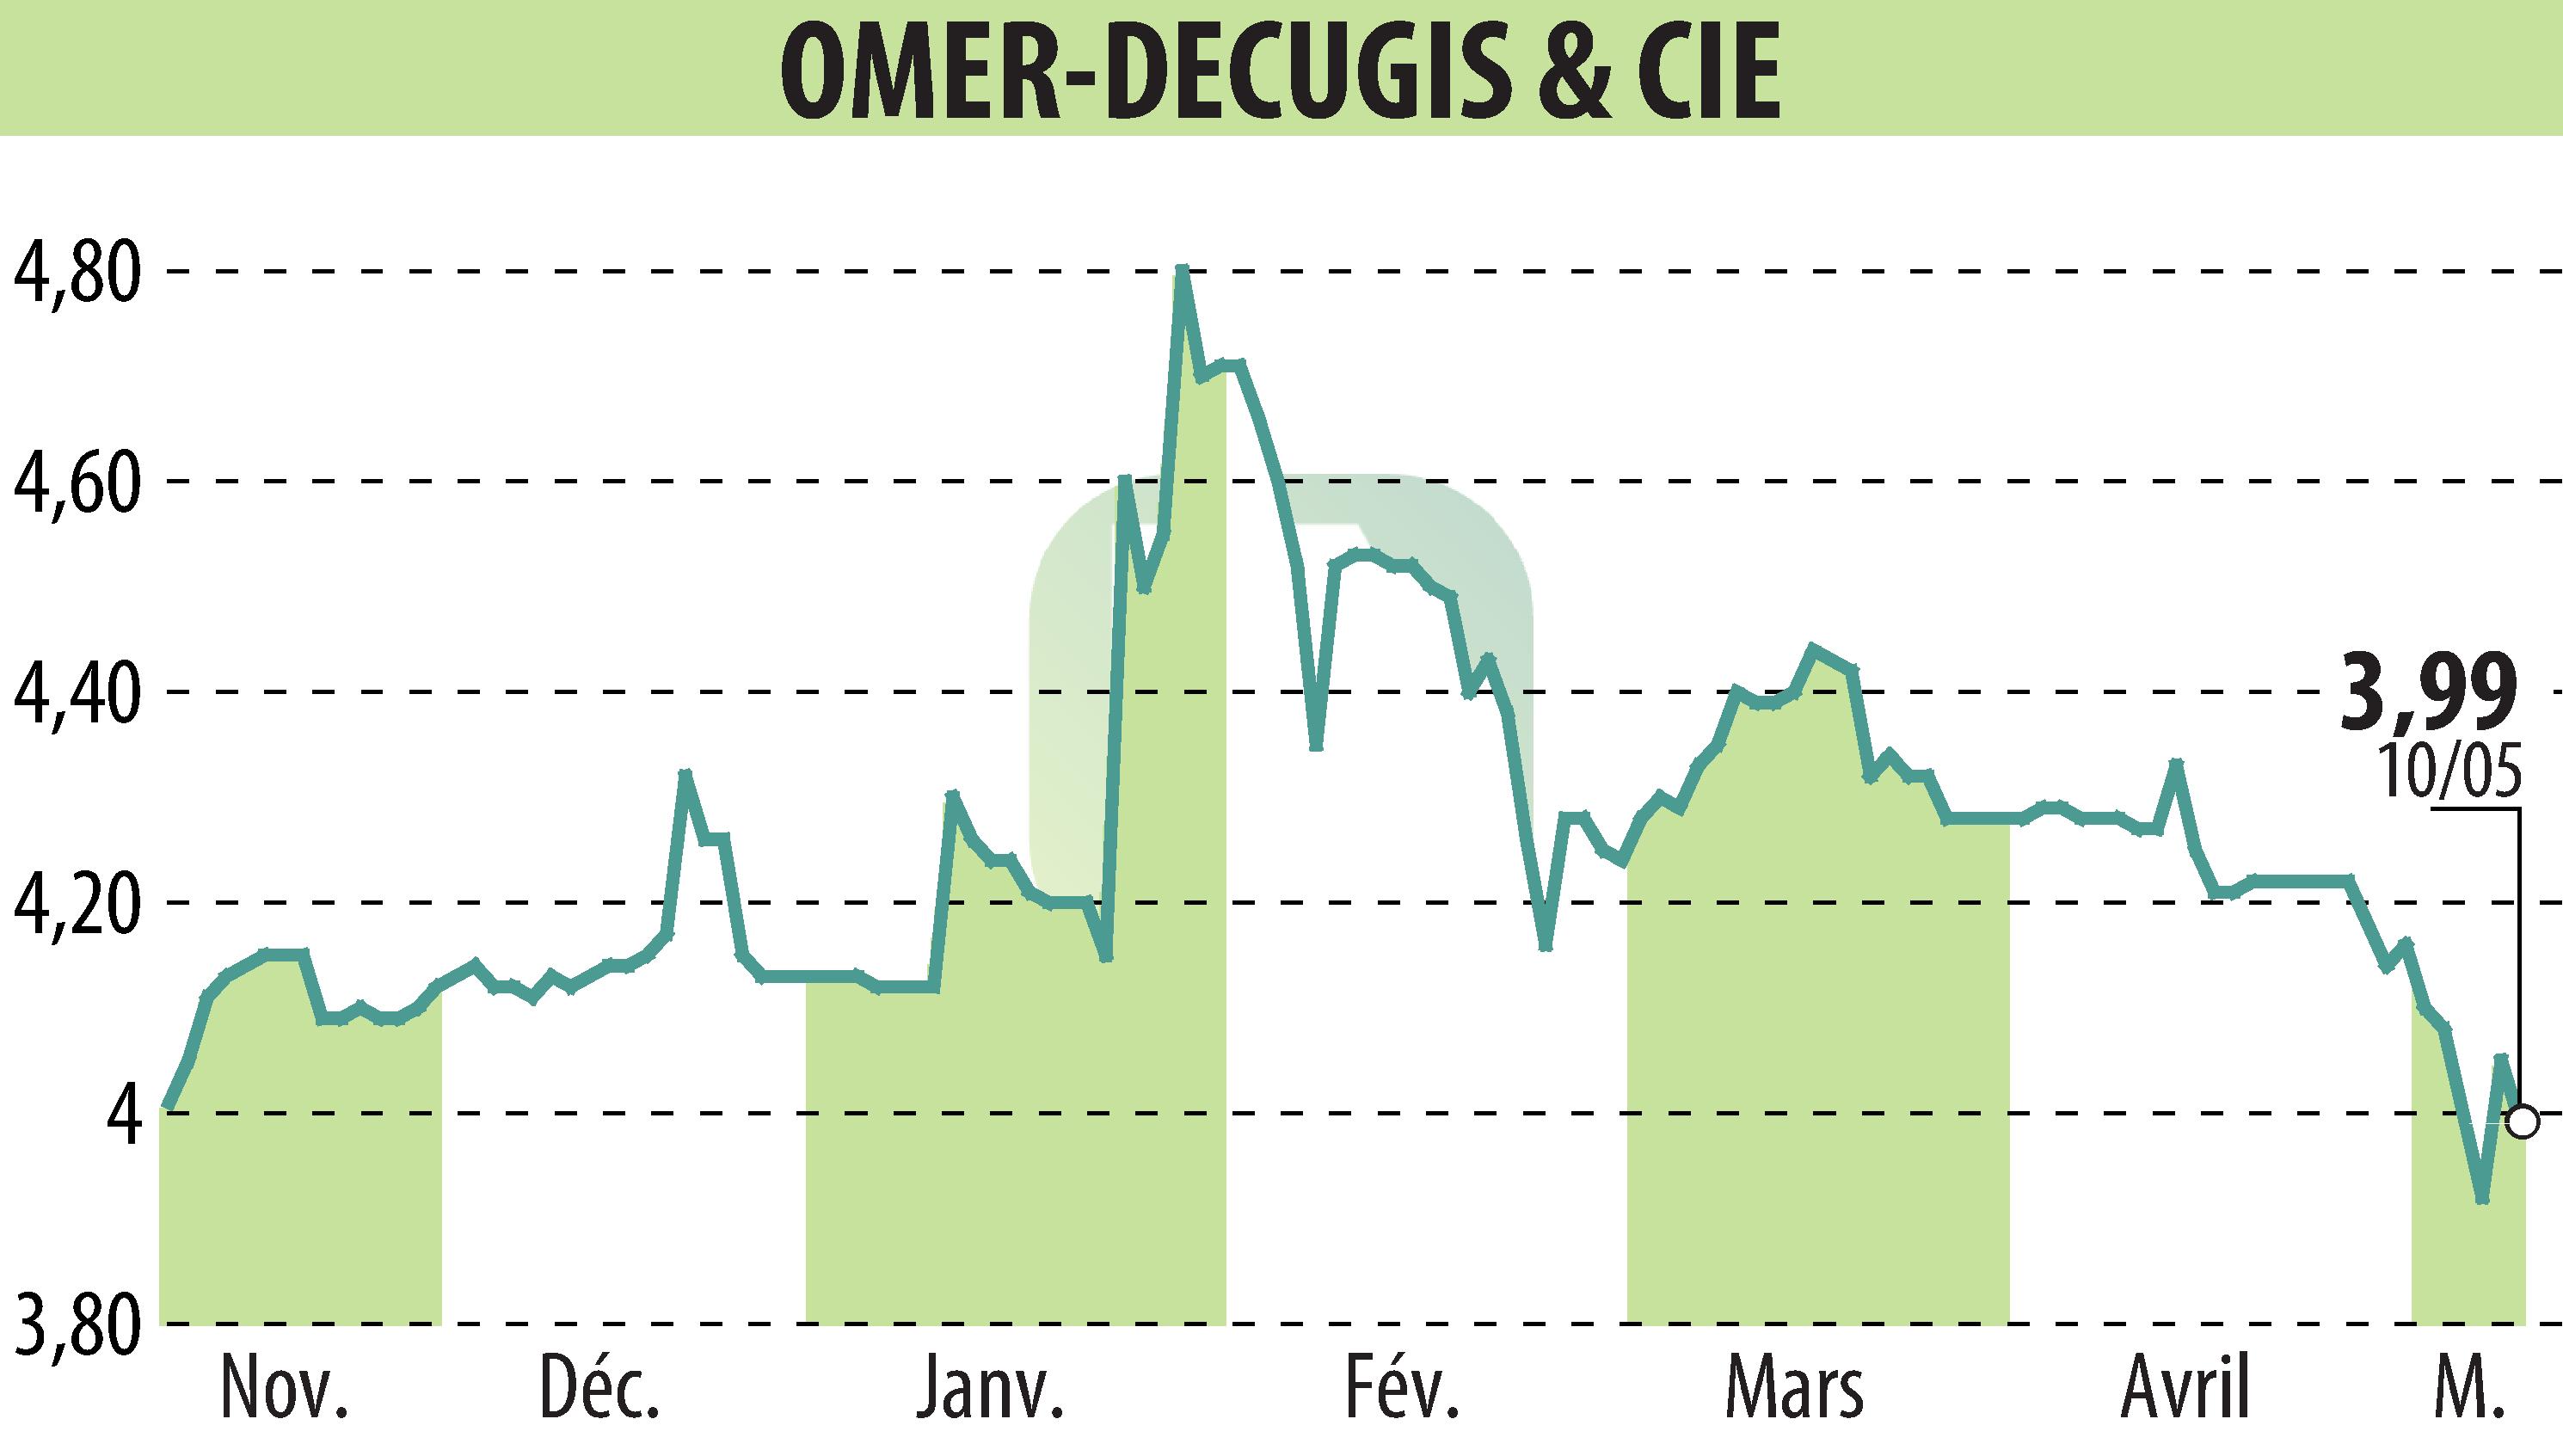 Stock price chart of OMER-DECUGIS & CIE (EPA:ALODC) showing fluctuations.